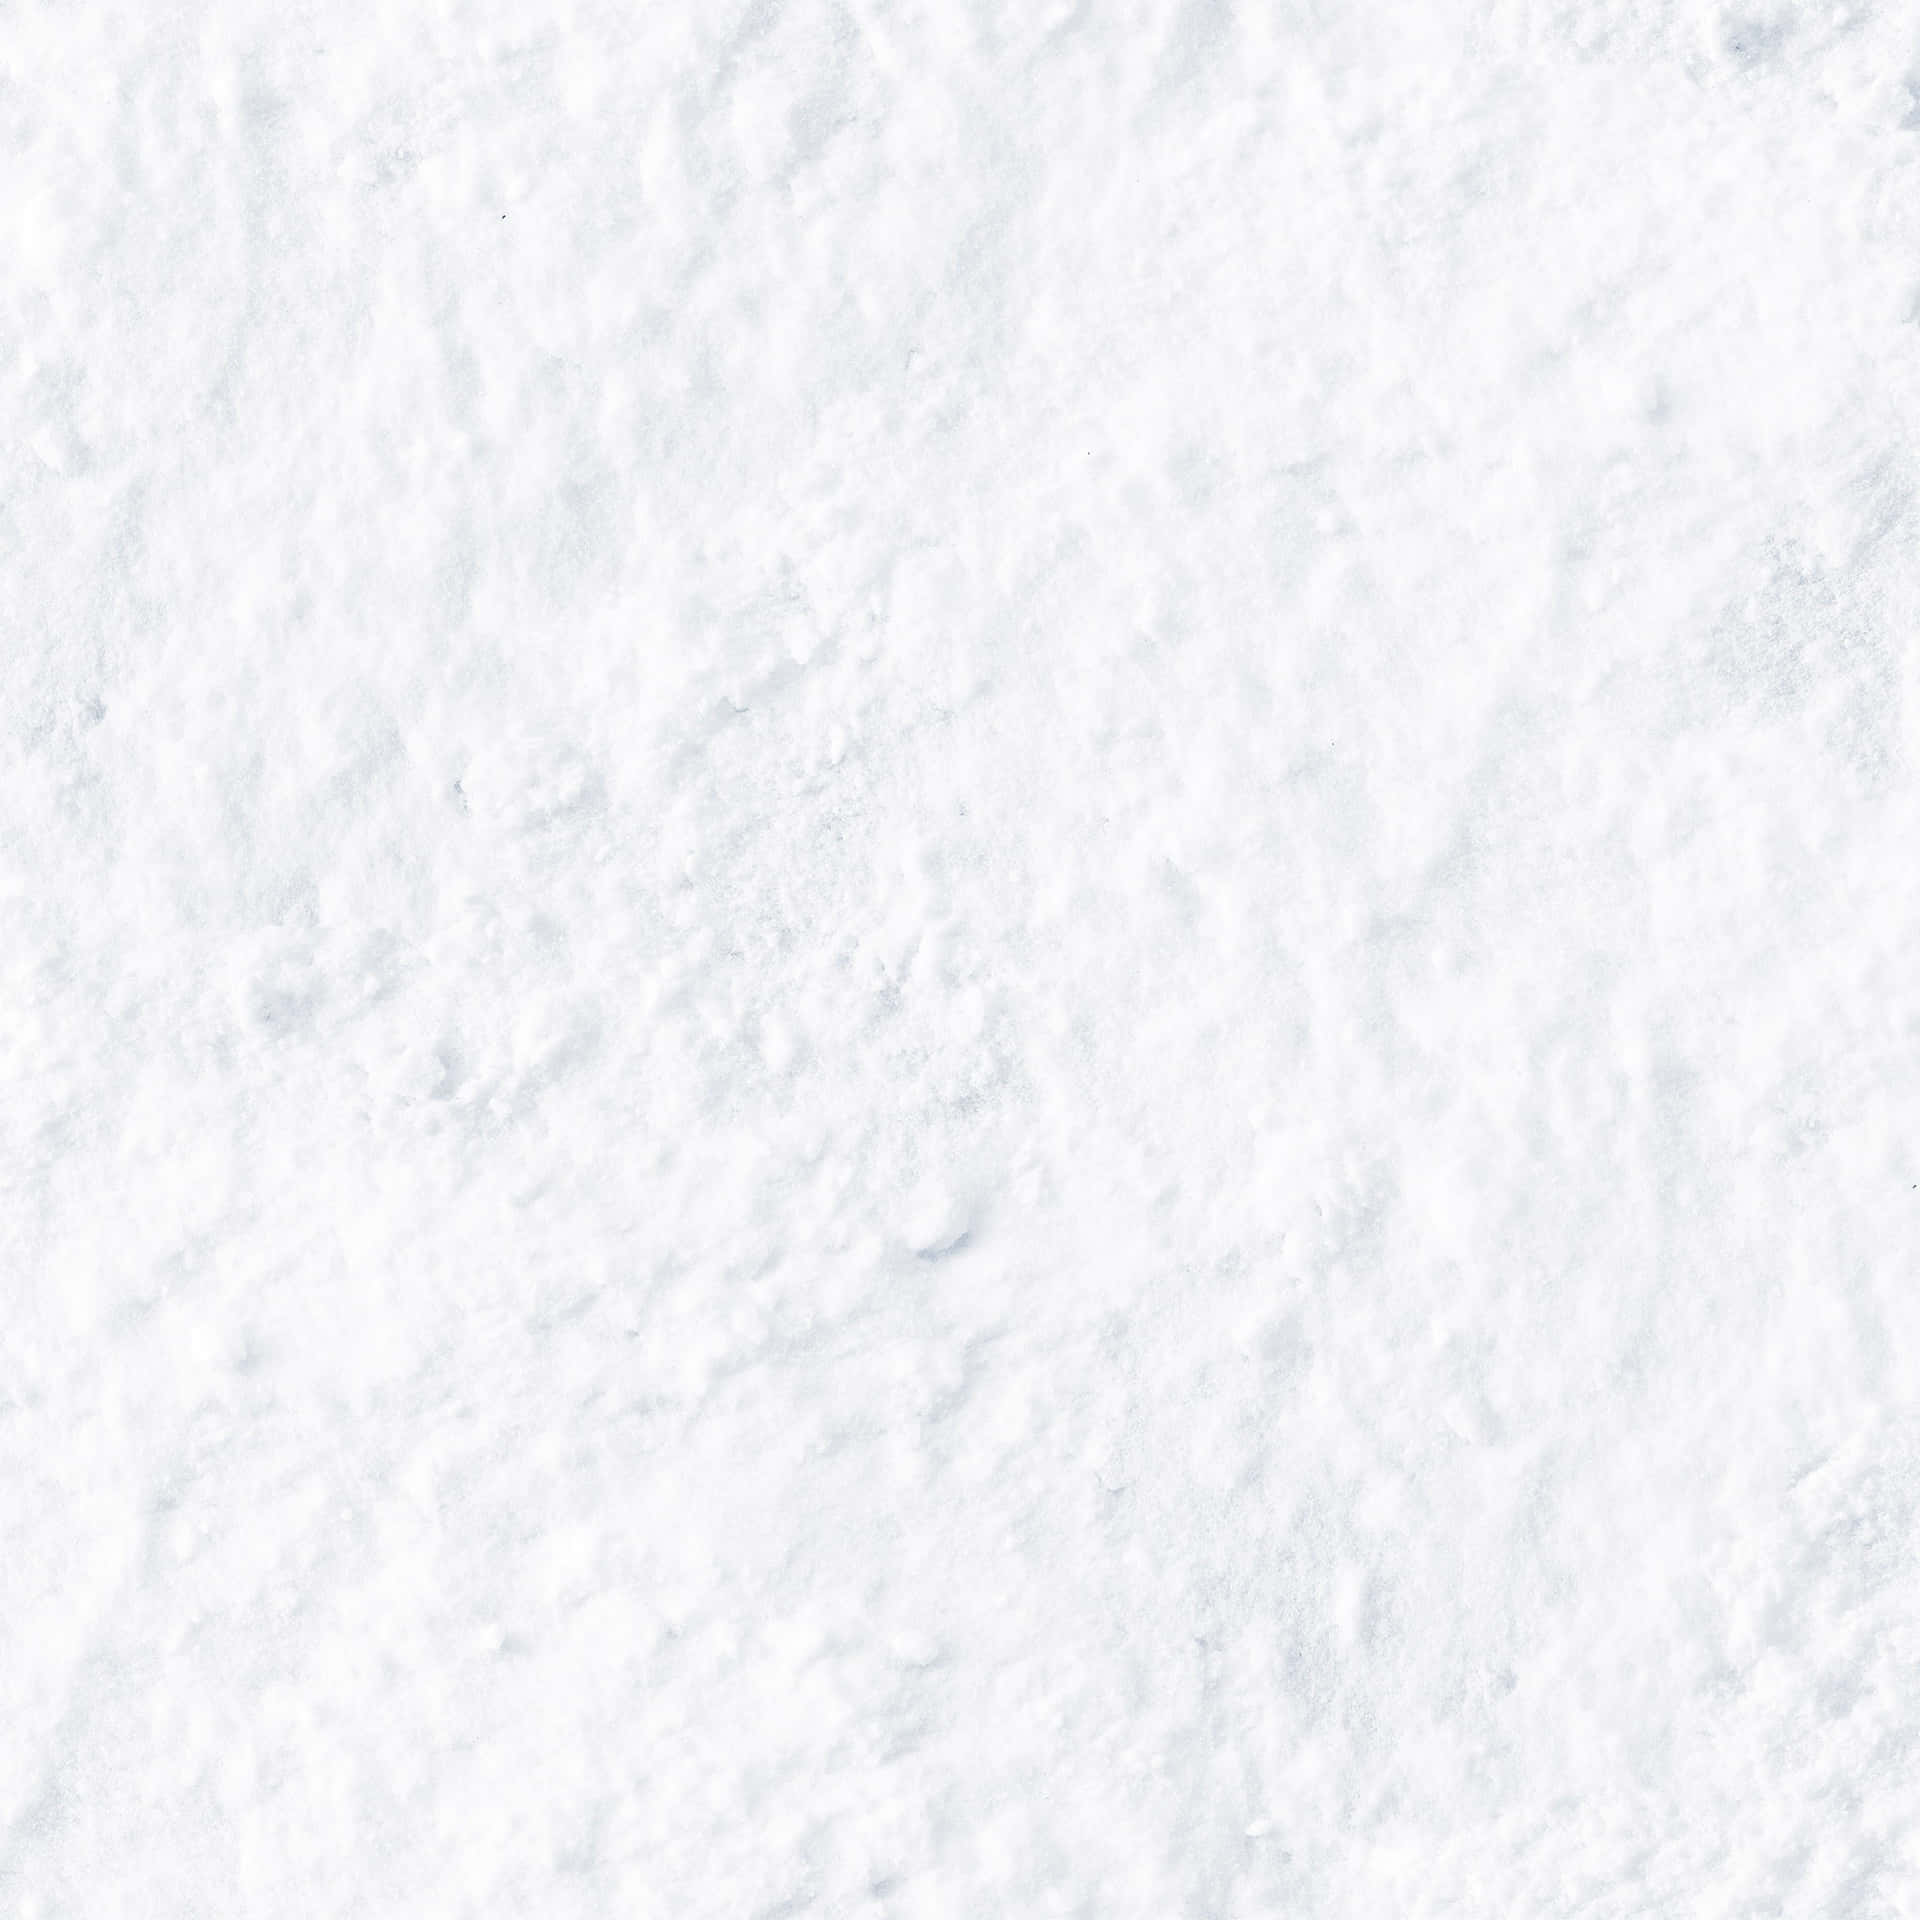 A White Snowy Background With A Snowflake Wallpaper